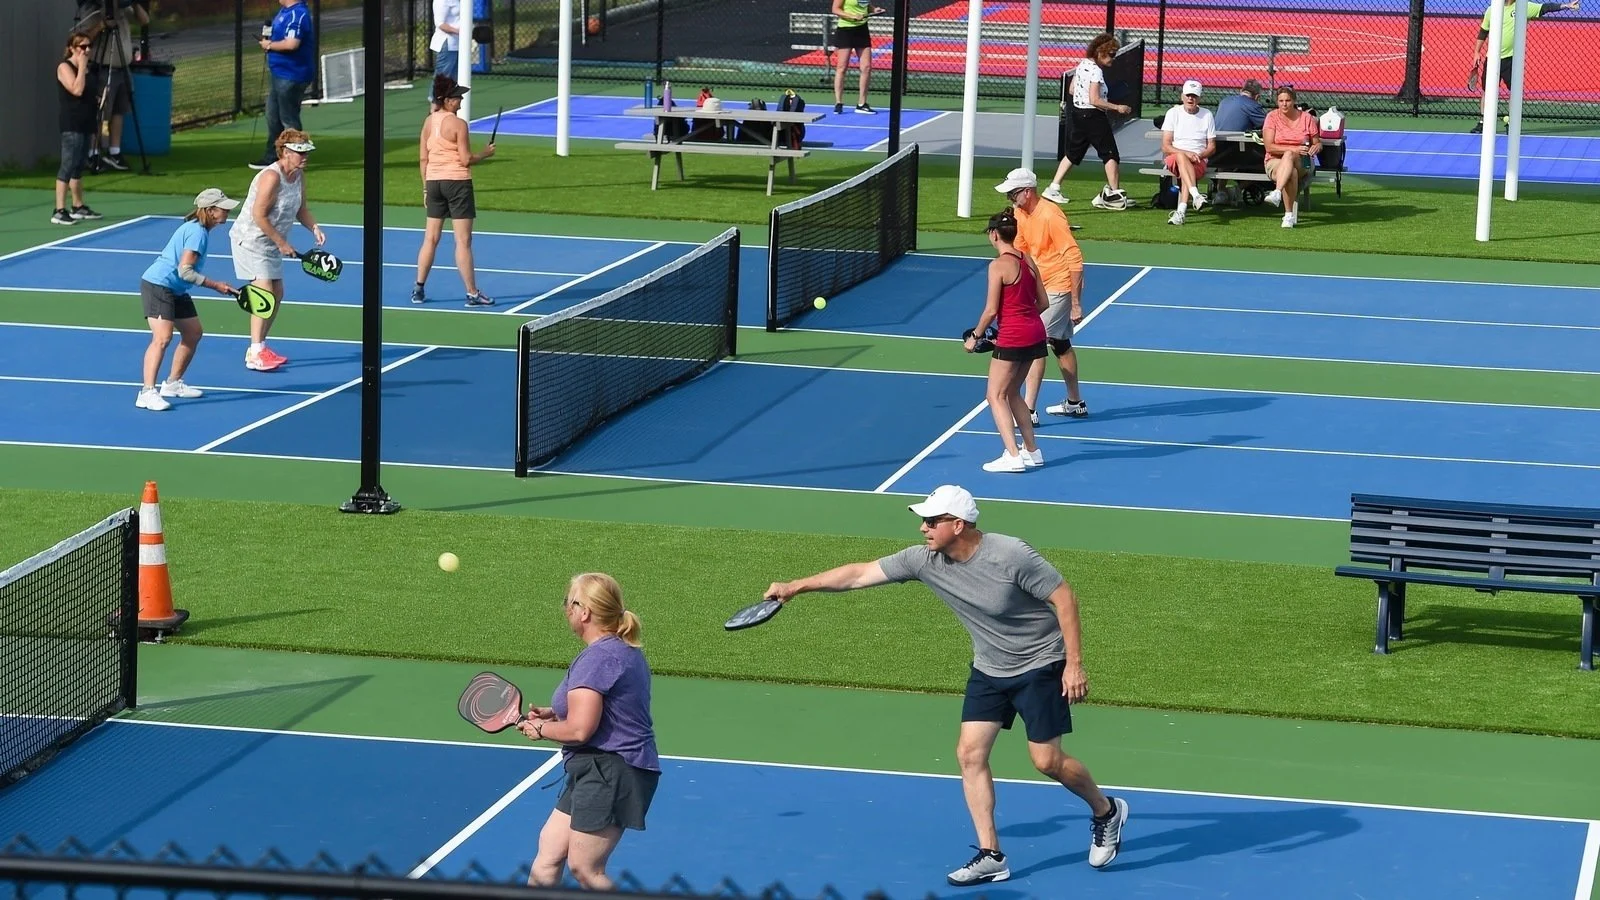 Chilmark Residents Recommend Public Pickleball Court